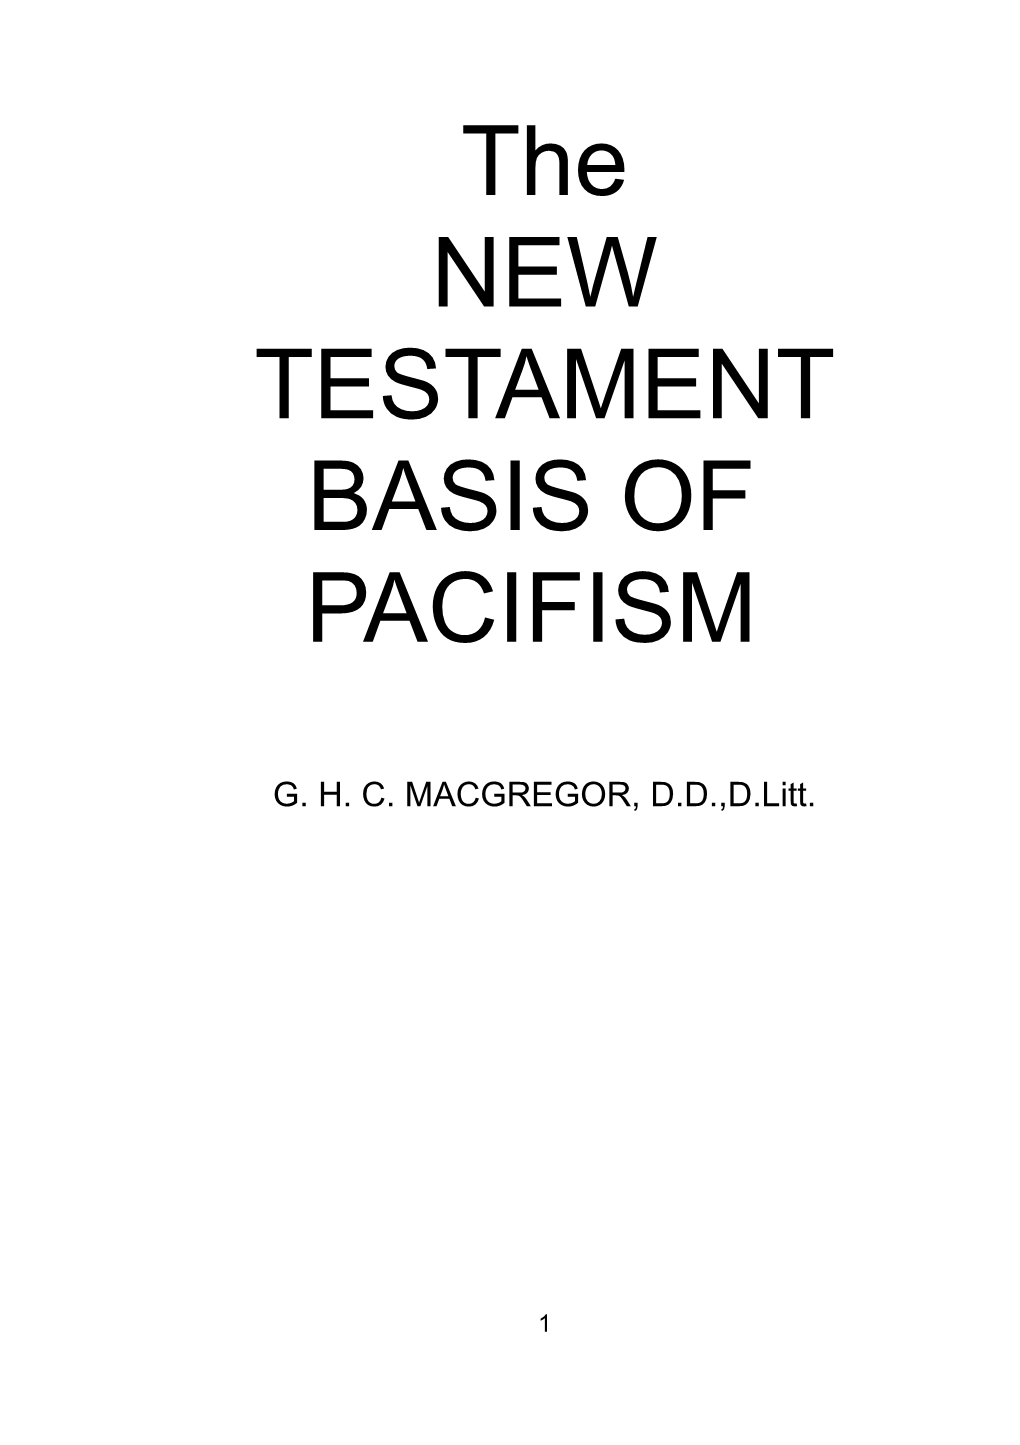 The NEW TESTAMENT BASIS of PACIFISM